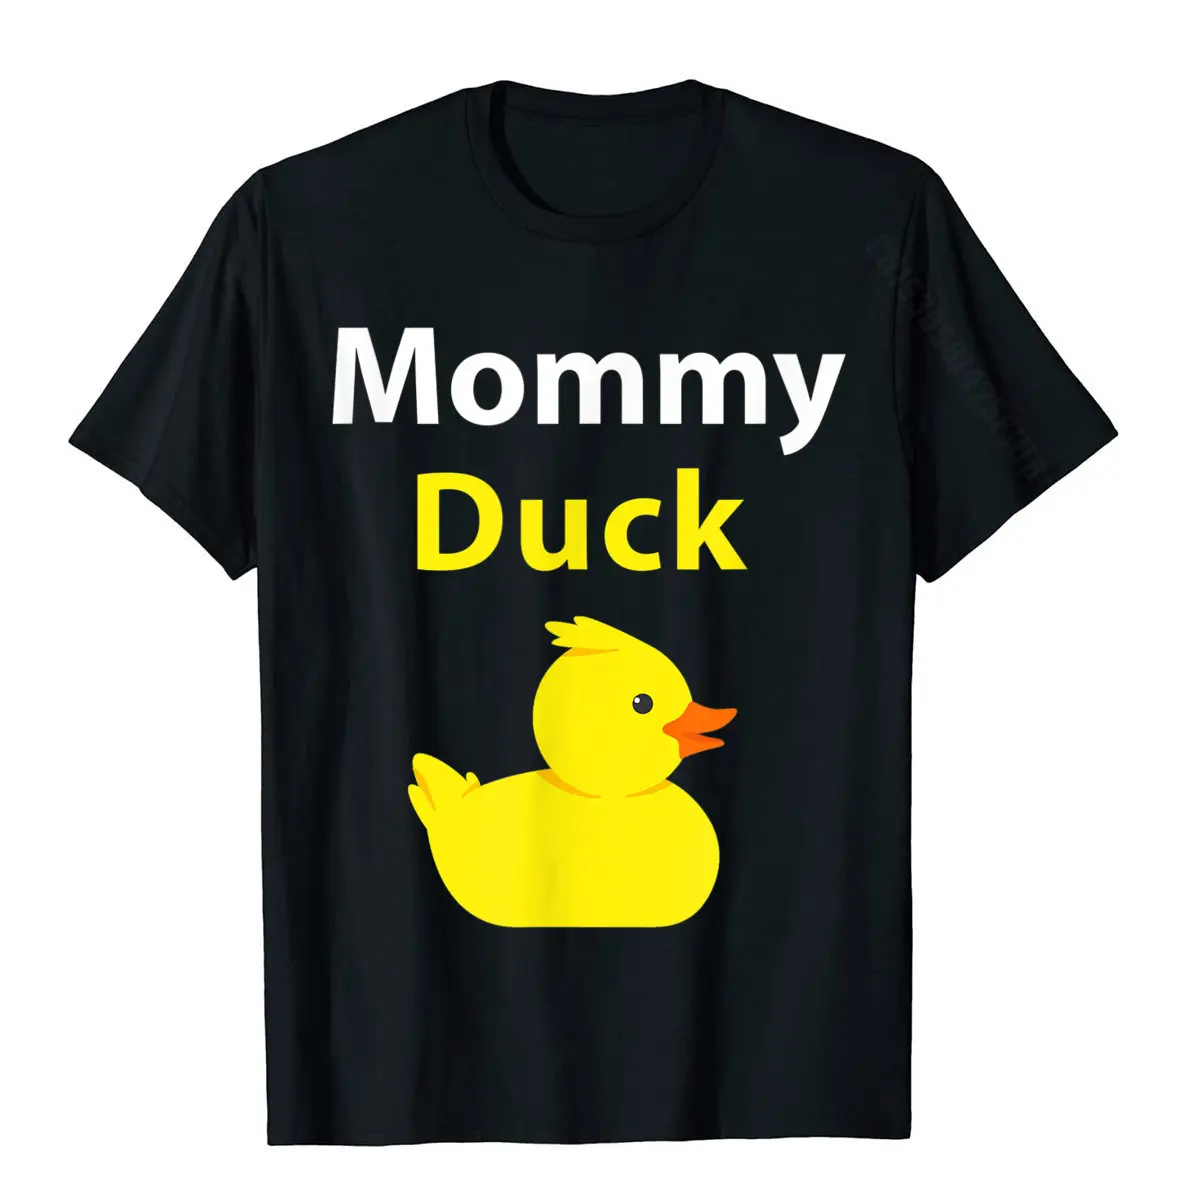 Casual T-shirts Fashionable Short Sleeve Slim Fit O Neck 100% Cotton Tops T Shirt comfortable T-shirts for Men Summer Funny Mommy Duck Rubber Duck Mom T-Shirt__1955 black